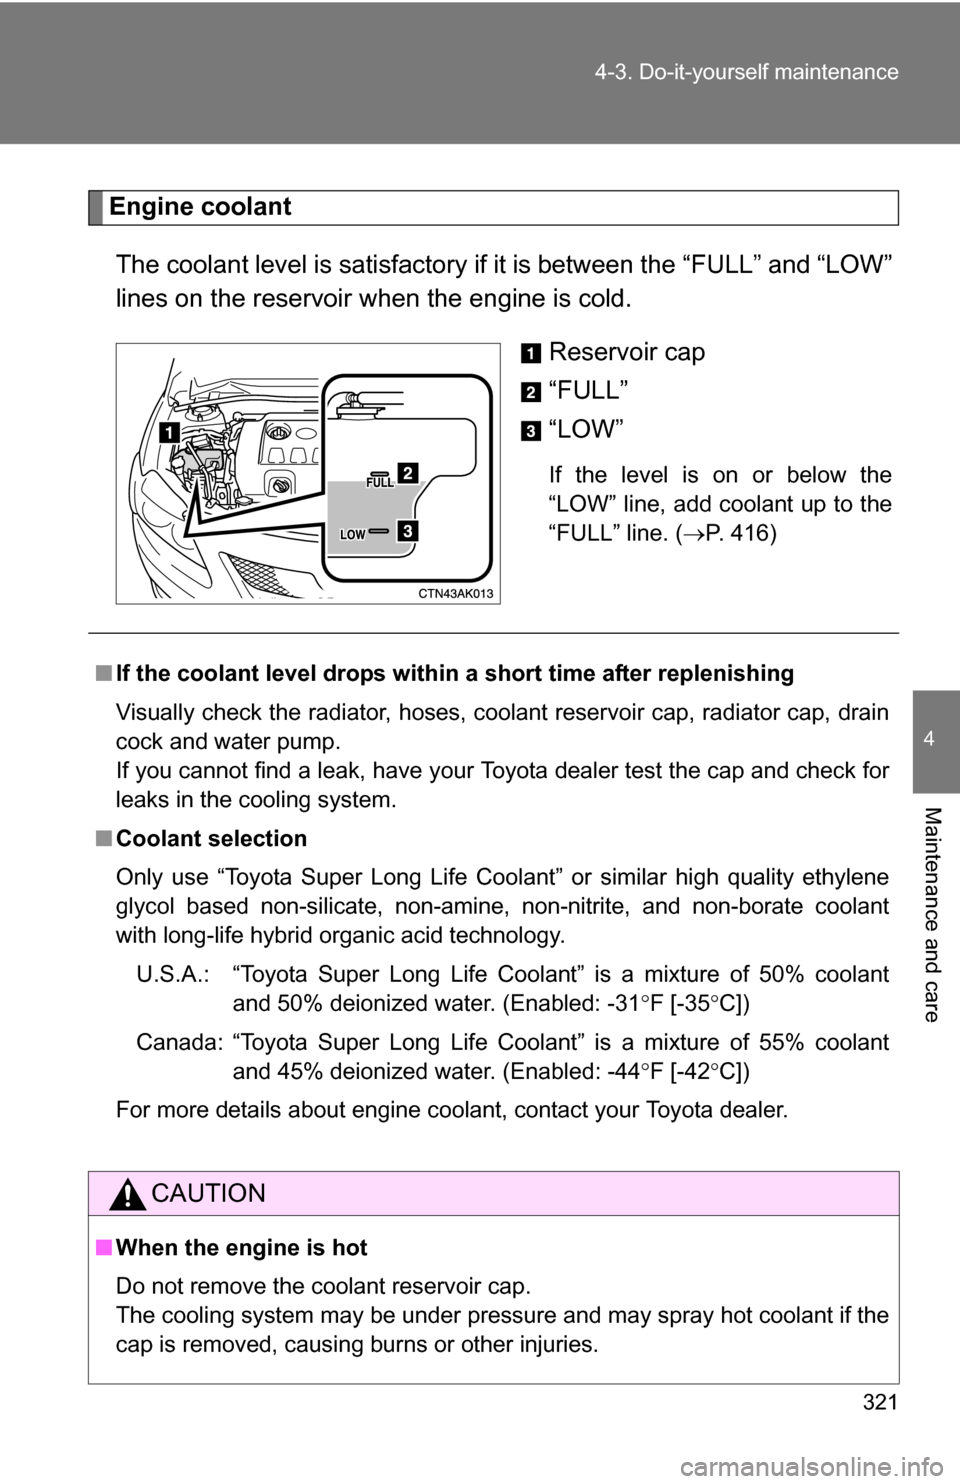 TOYOTA COROLLA 2010 10.G Owners Manual 321
4-3. Do-it-yourself maintenance
4
Maintenance and care
Engine coolant
The coolant level is satisfactory if  it is between the “FULL” and “LOW”
lines on the reservoir when the engine is col